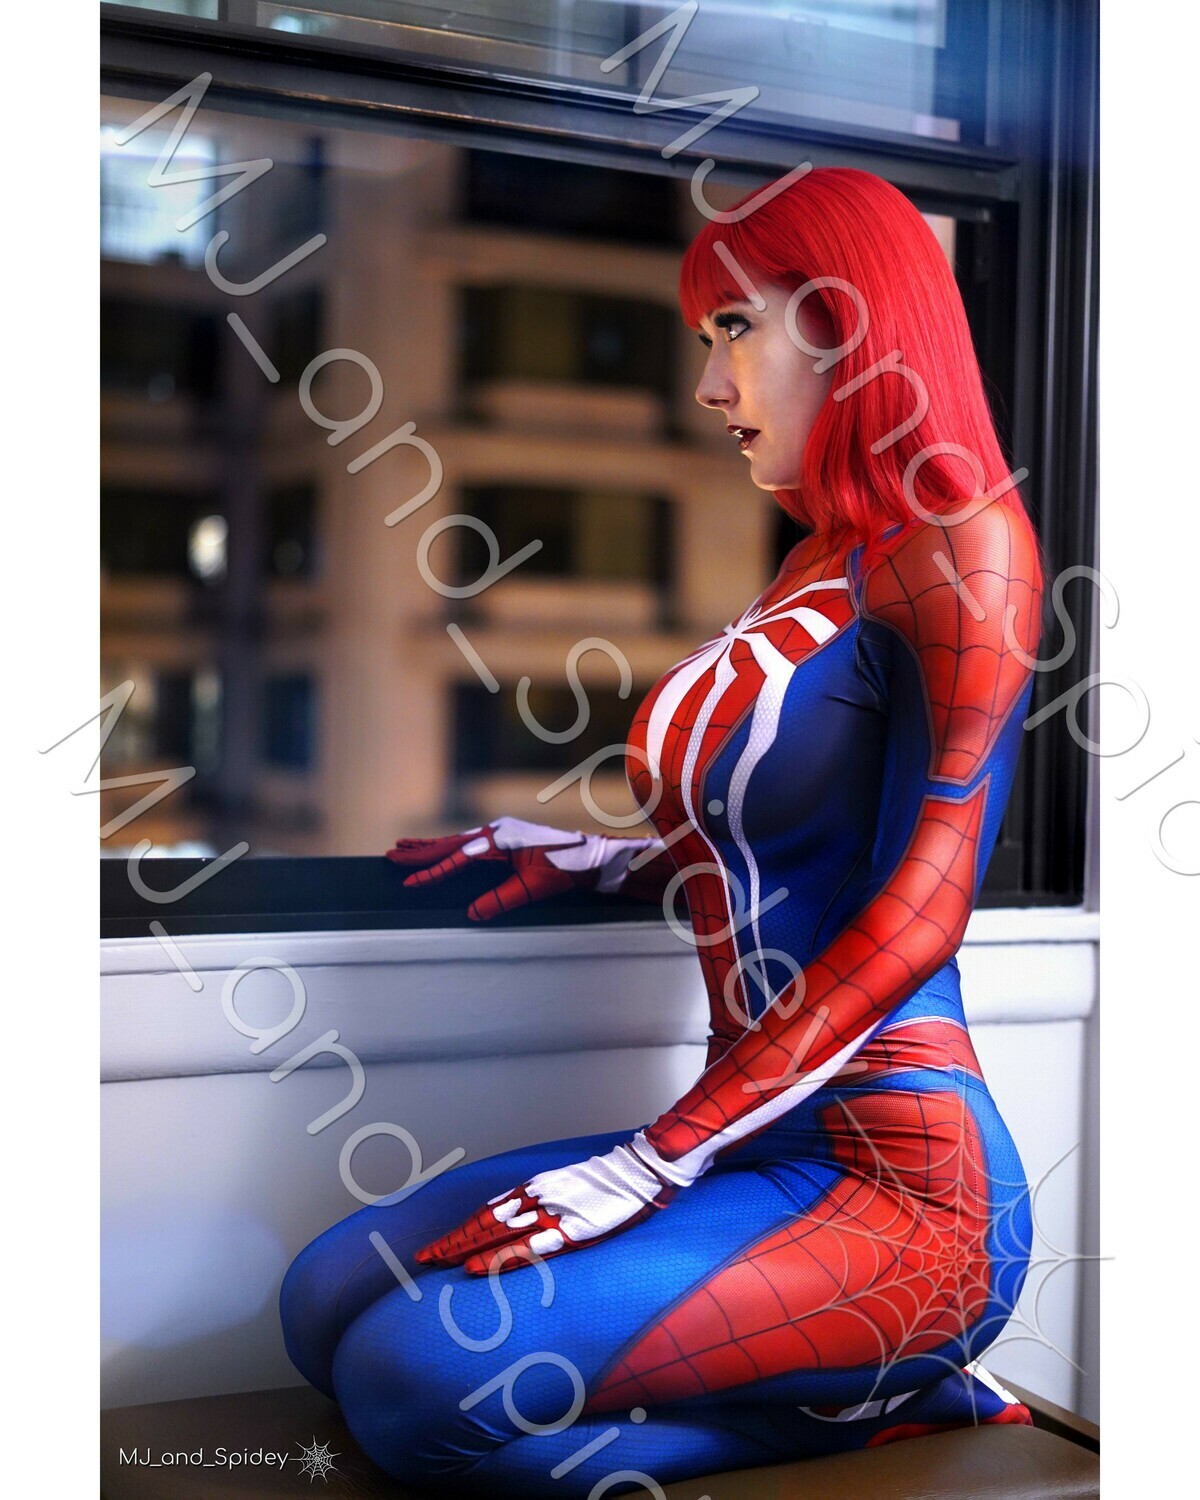 Marvel - Spider-Man - Mary Jane Watson - PS4 Insomniac Spider-Suit 1 -  Cosplay Print (@MJ_and_Spidey, MJ and Spidey, Comics)